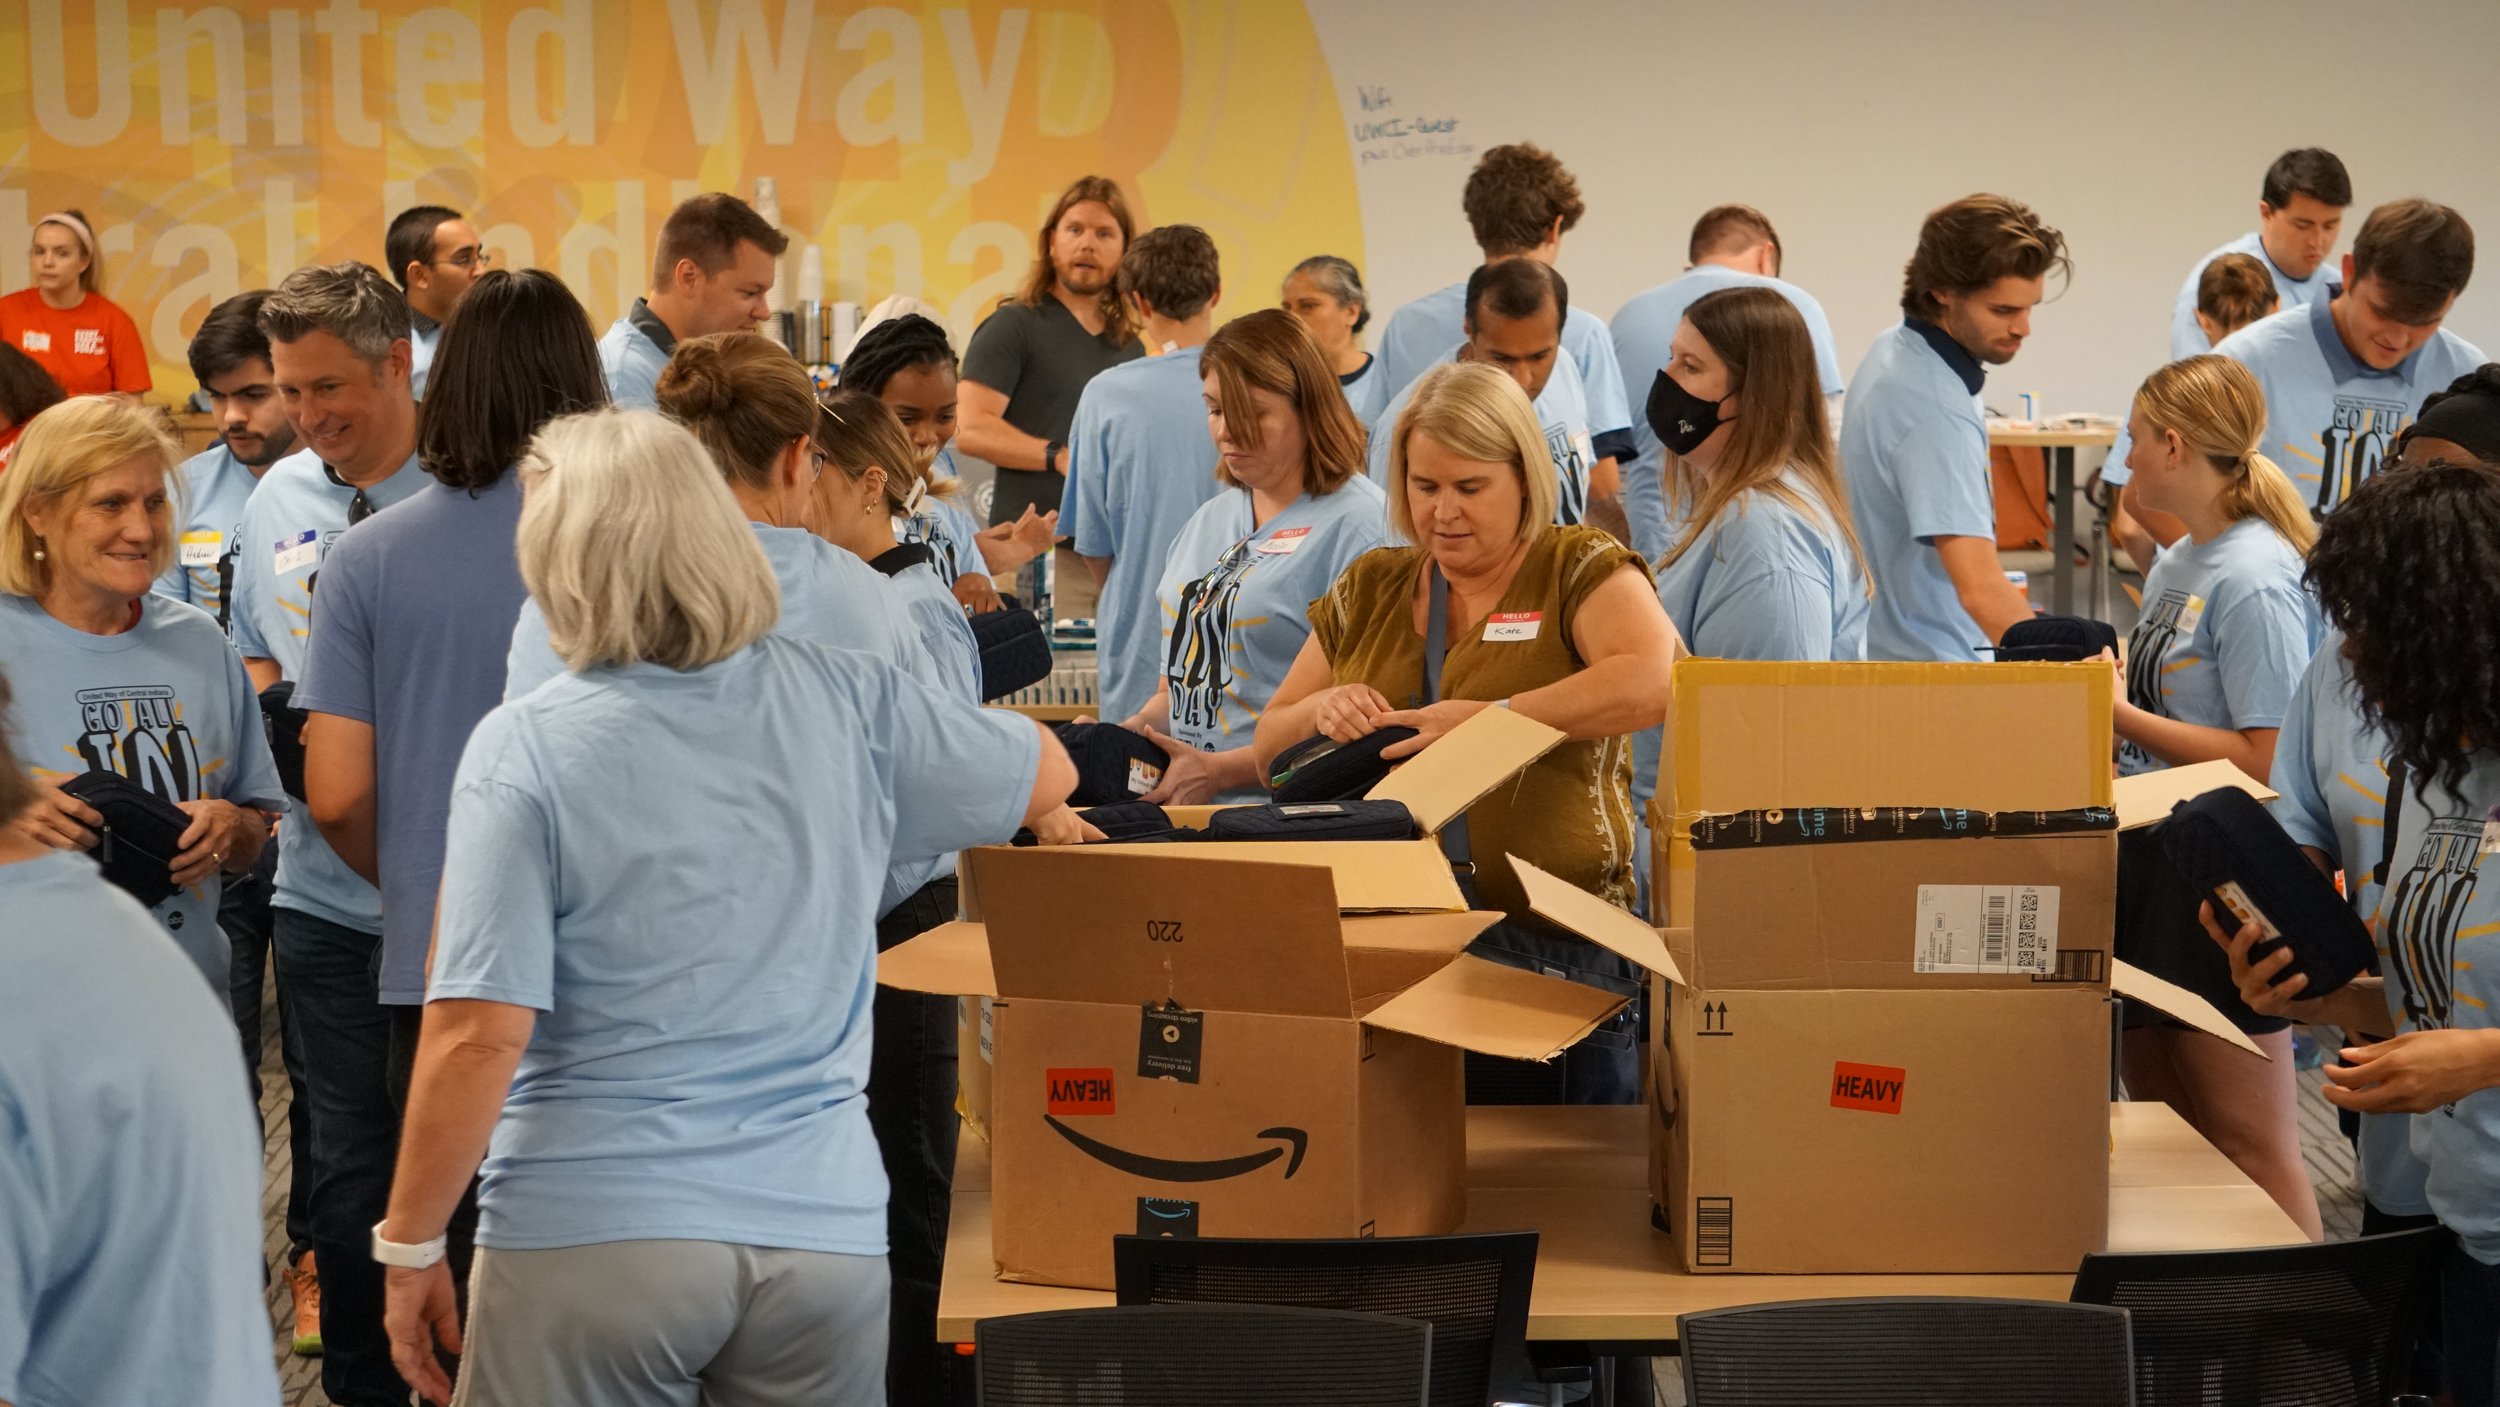  Volunteers stuff bags with school supplies at United Way of Central Indiana’s headquarters on June 24, 2022, for Go All IN Day. The bags will go to kids participating in Indy Parks camps this summer.  